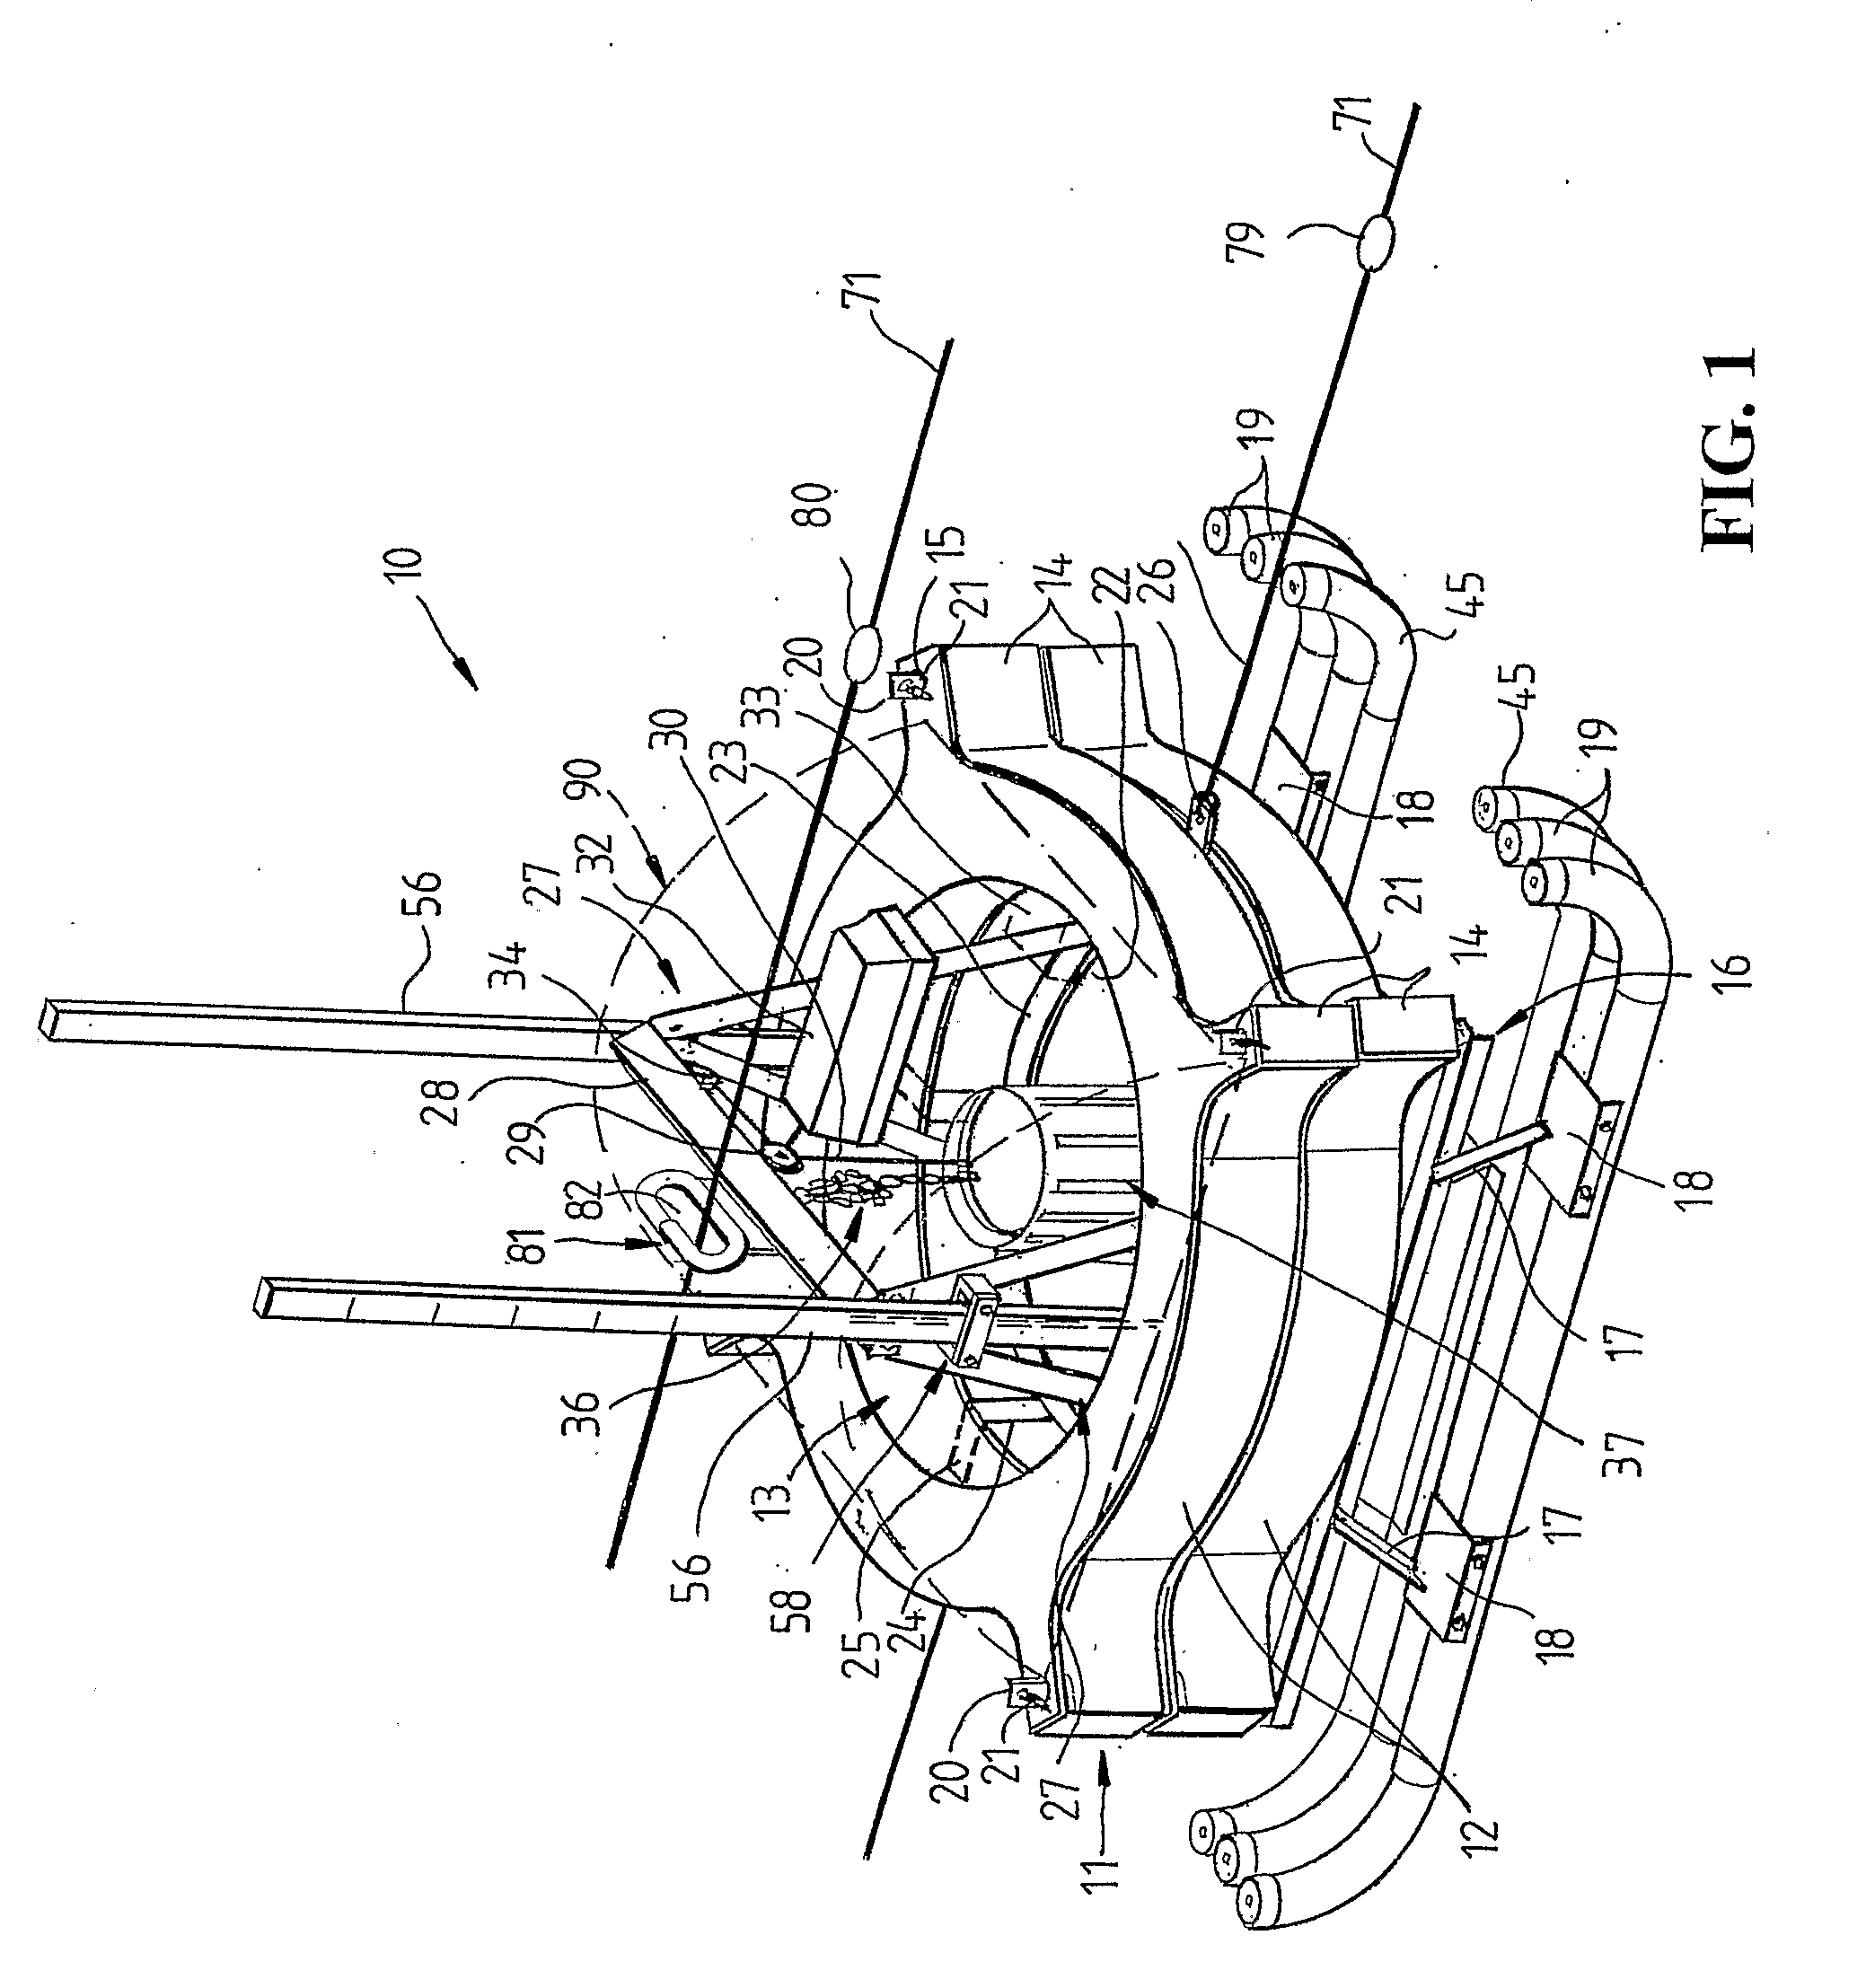 Method and Apparatus for Collecting and/or Removing Sludge